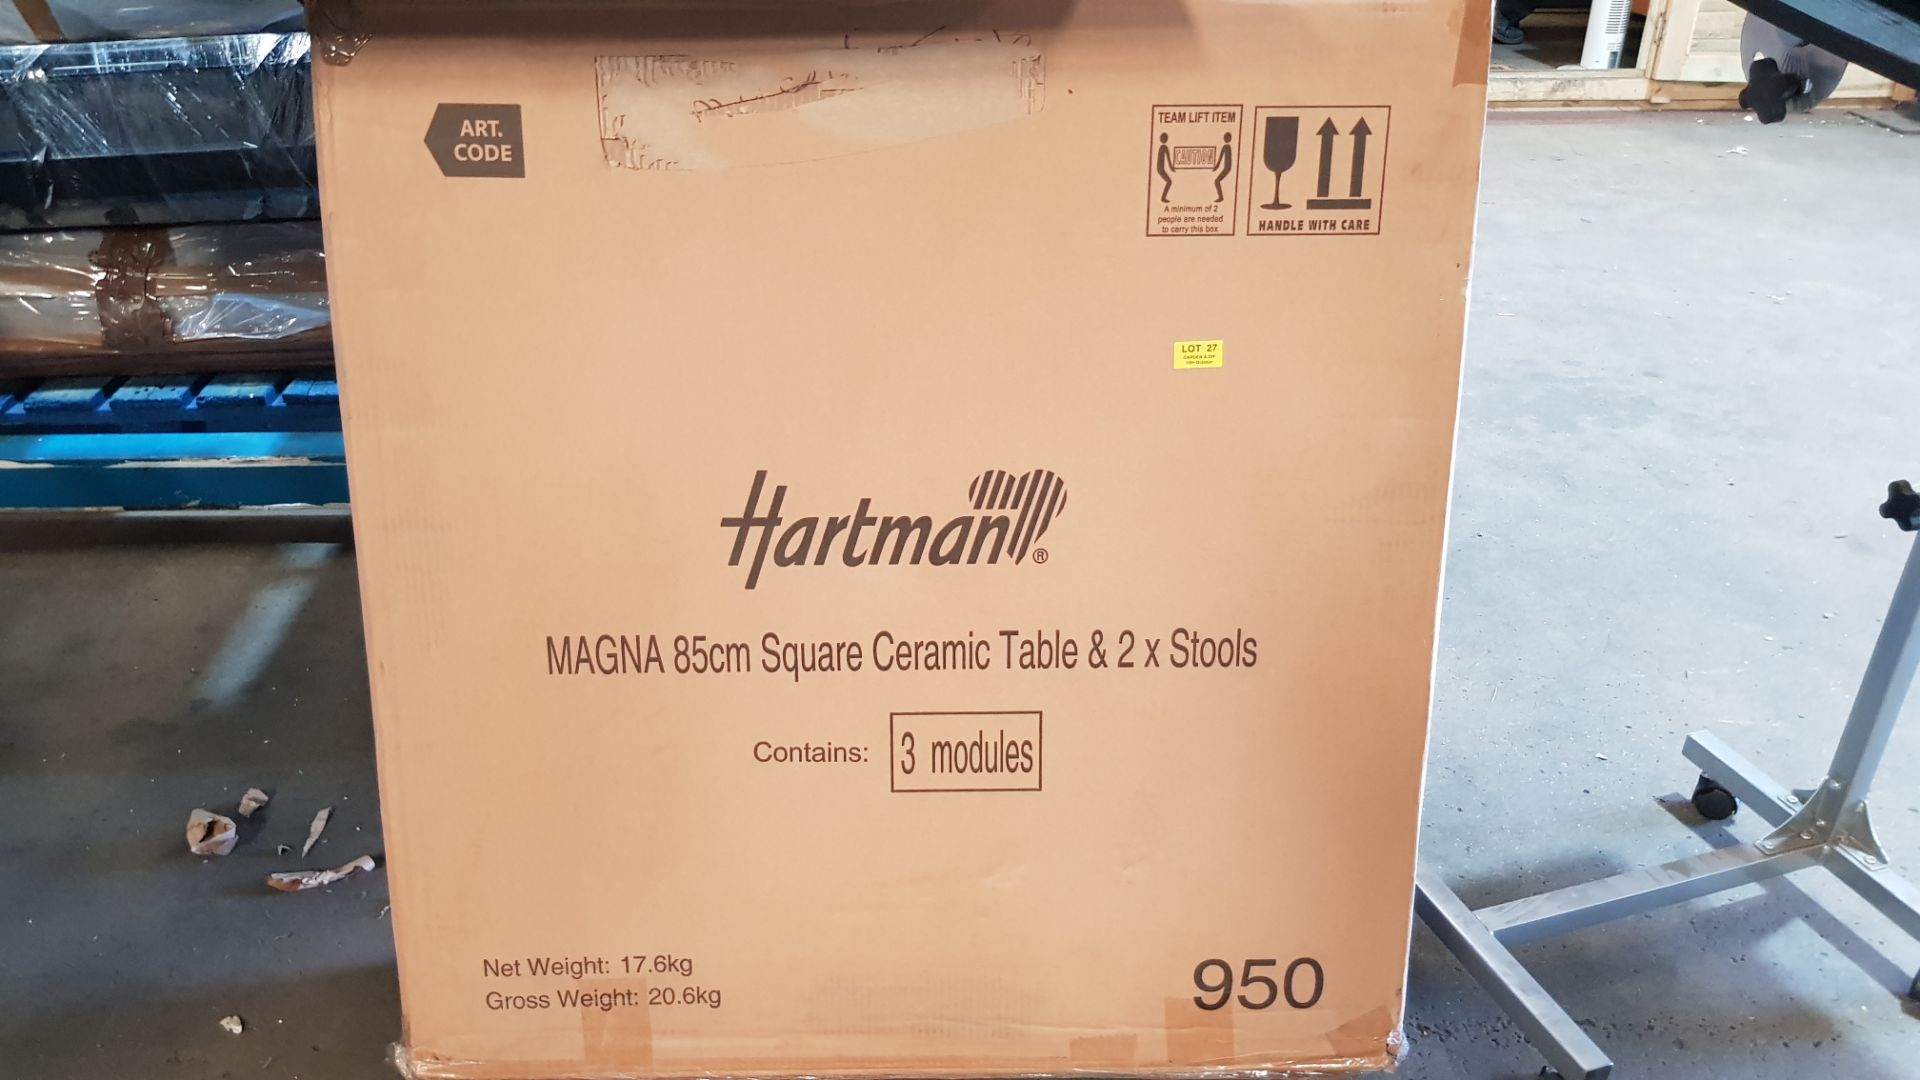 (2I) 1x Hartman MAGNA 85cm Square Ceramic Table & 2x Stools. Appears As New, Complete With Fixings. - Image 2 of 6